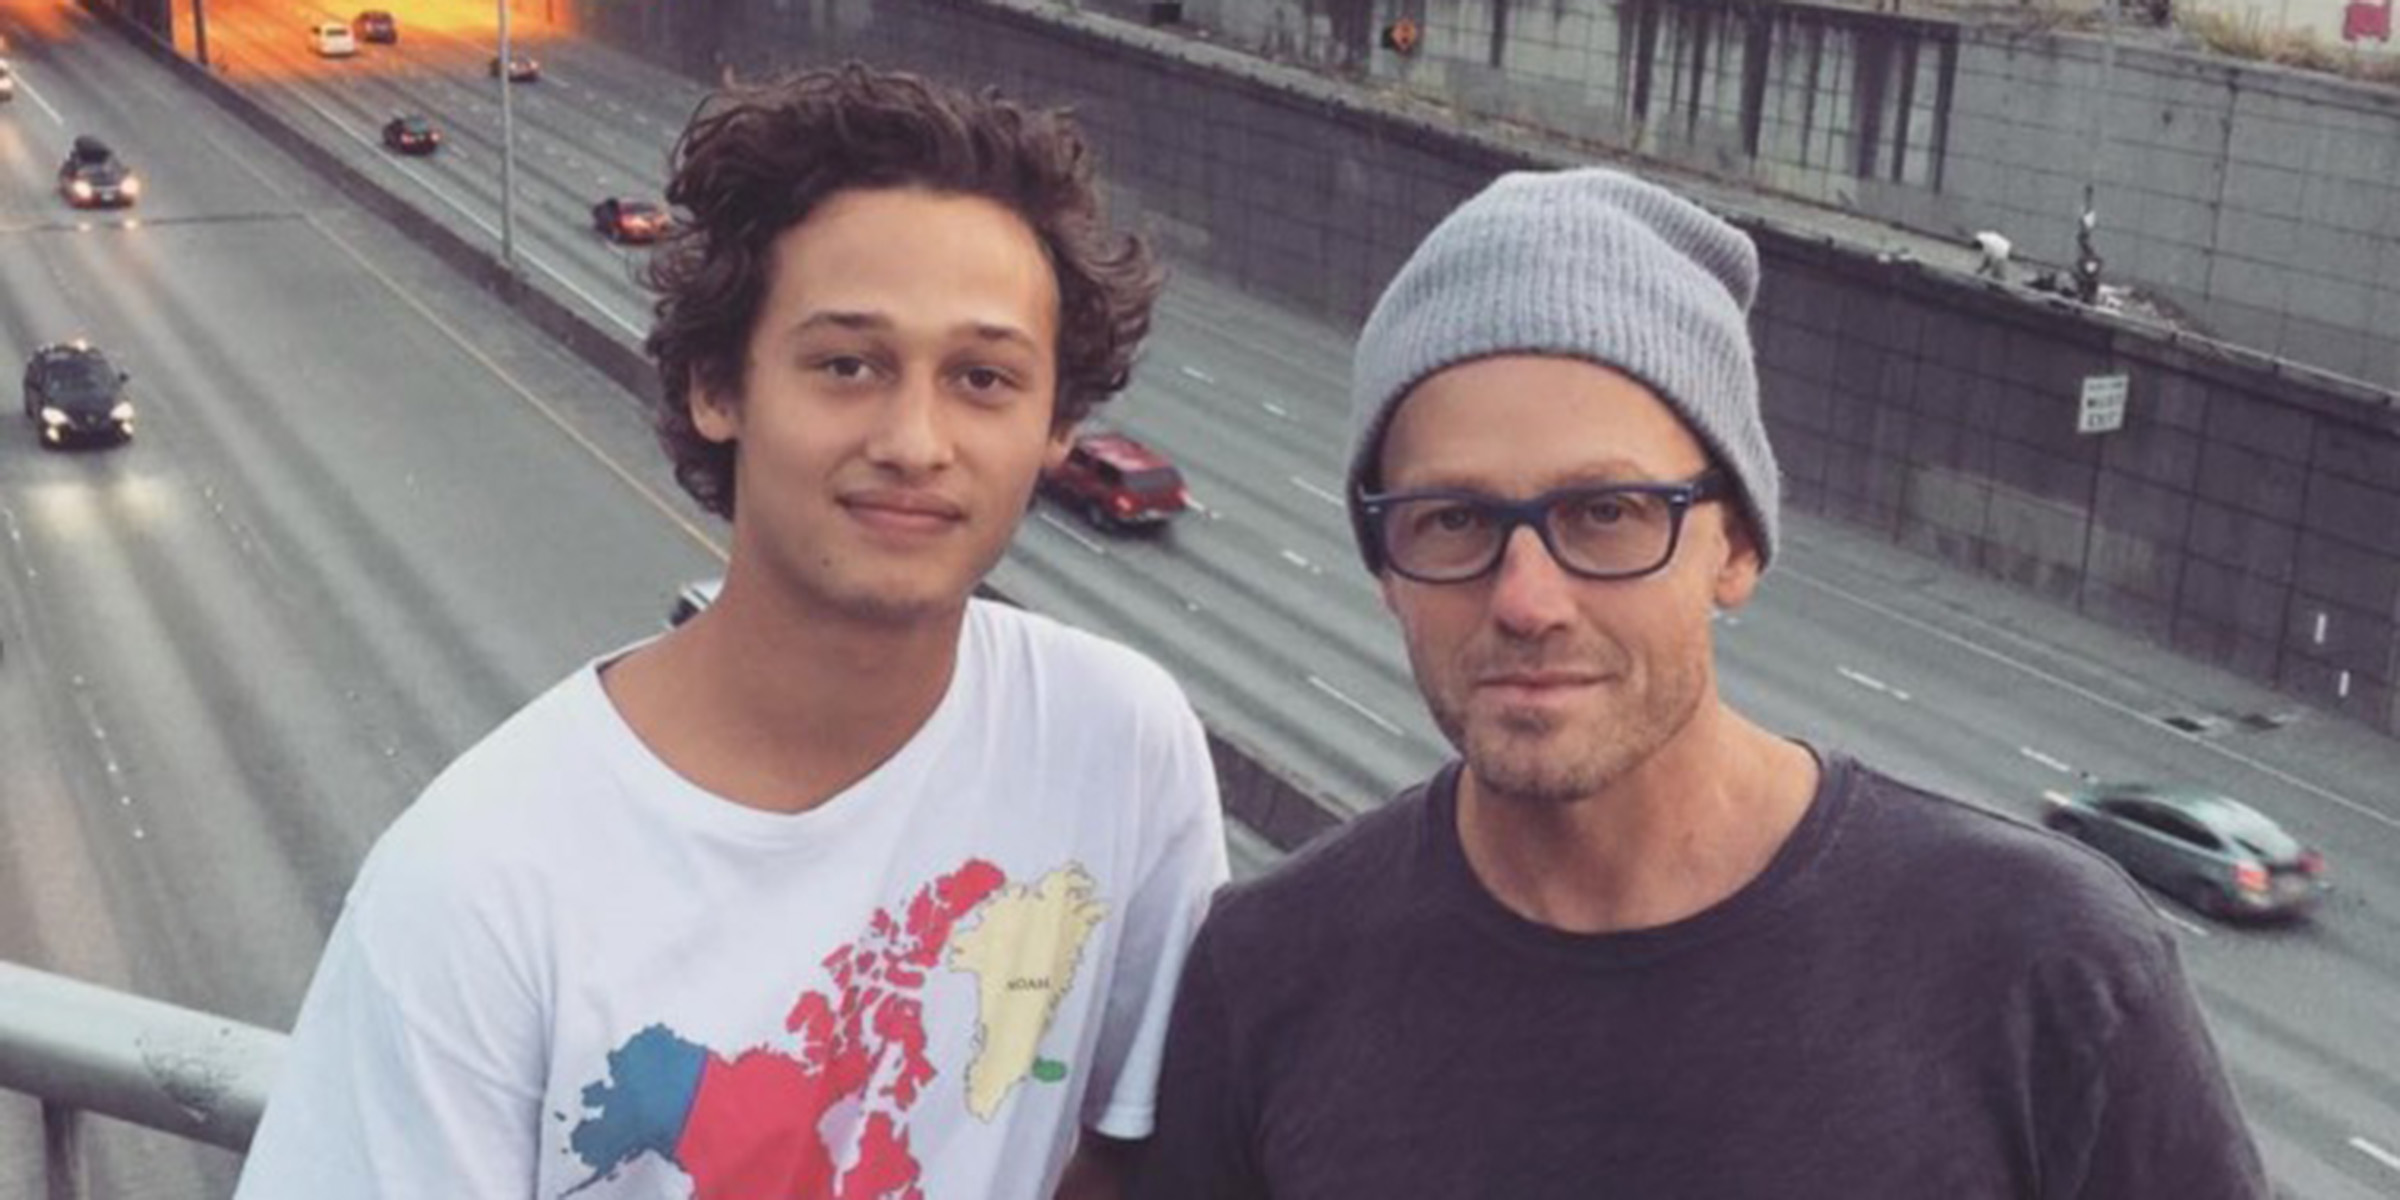 TobyMac says son's death taught him to think about eternity: 'I met grief in the fiercest way'